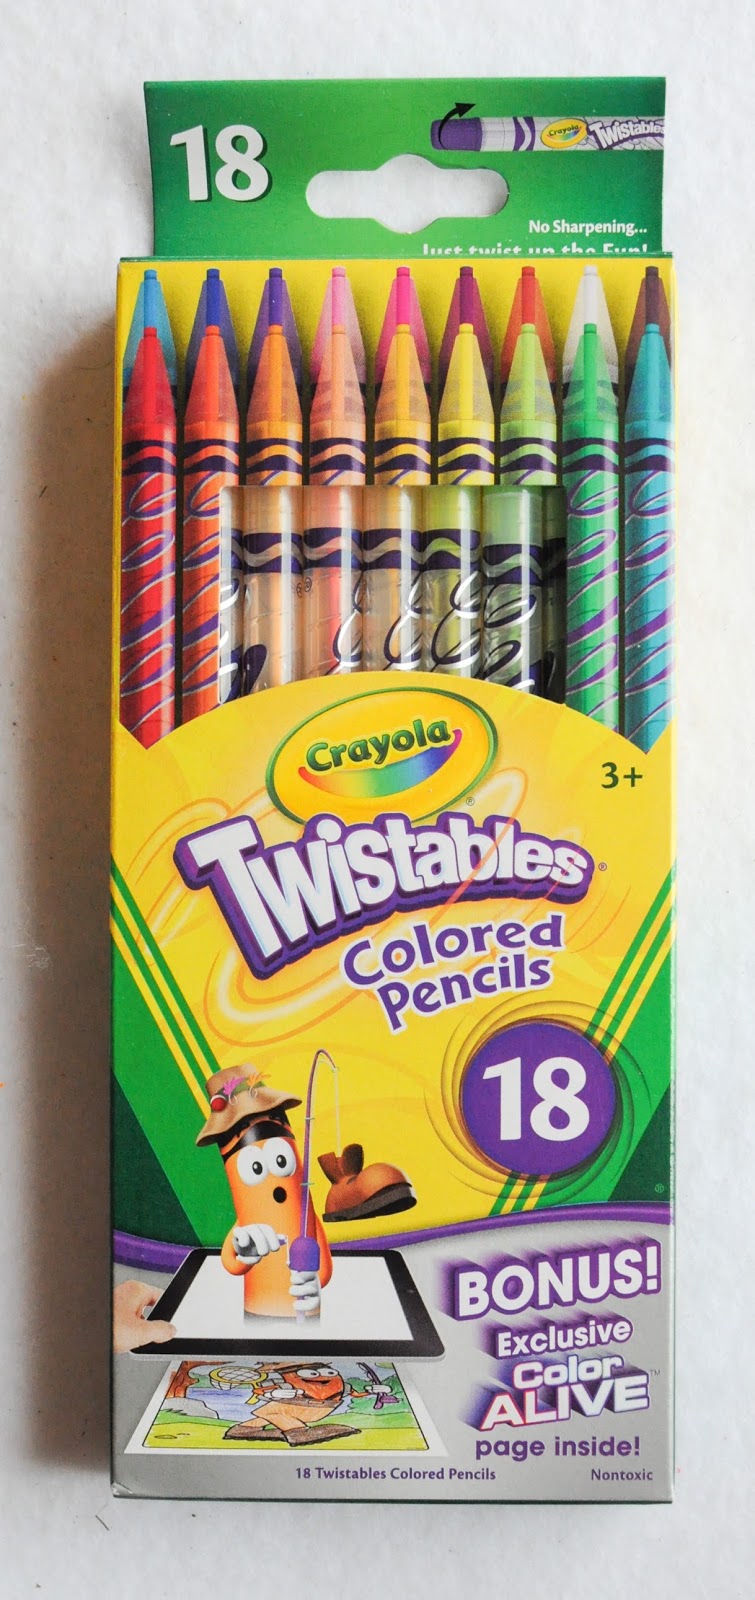 Crayola Twistables Colored Pencils, 30 Count, Assorted Colors